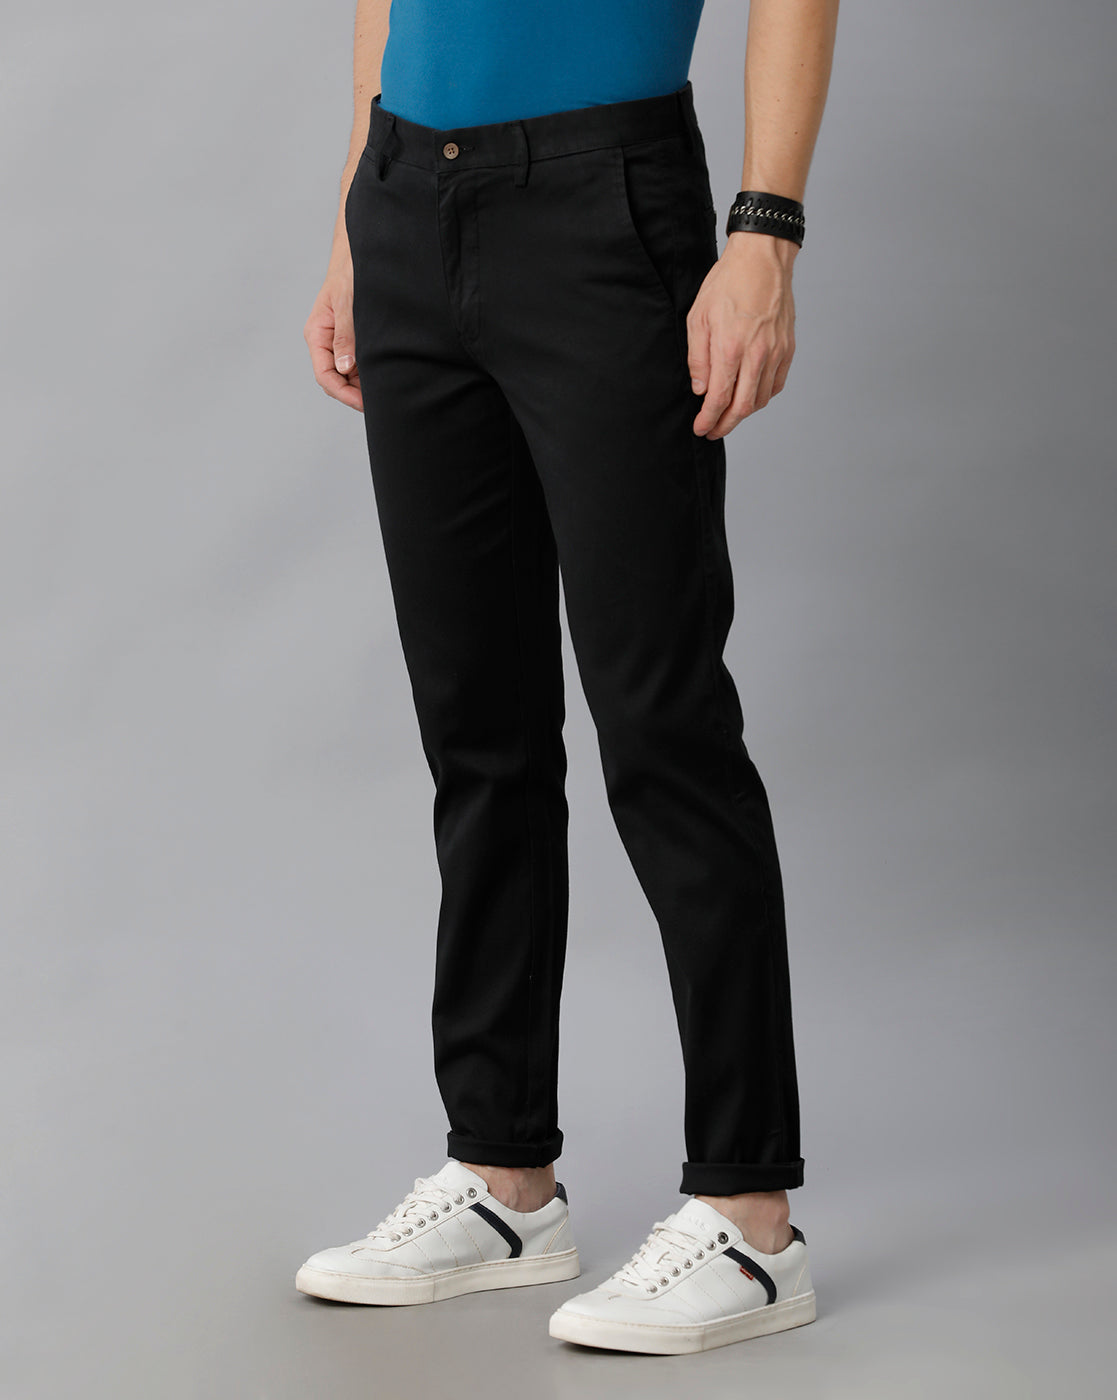 Solid Black Casual Cotton Trouser - Double Two